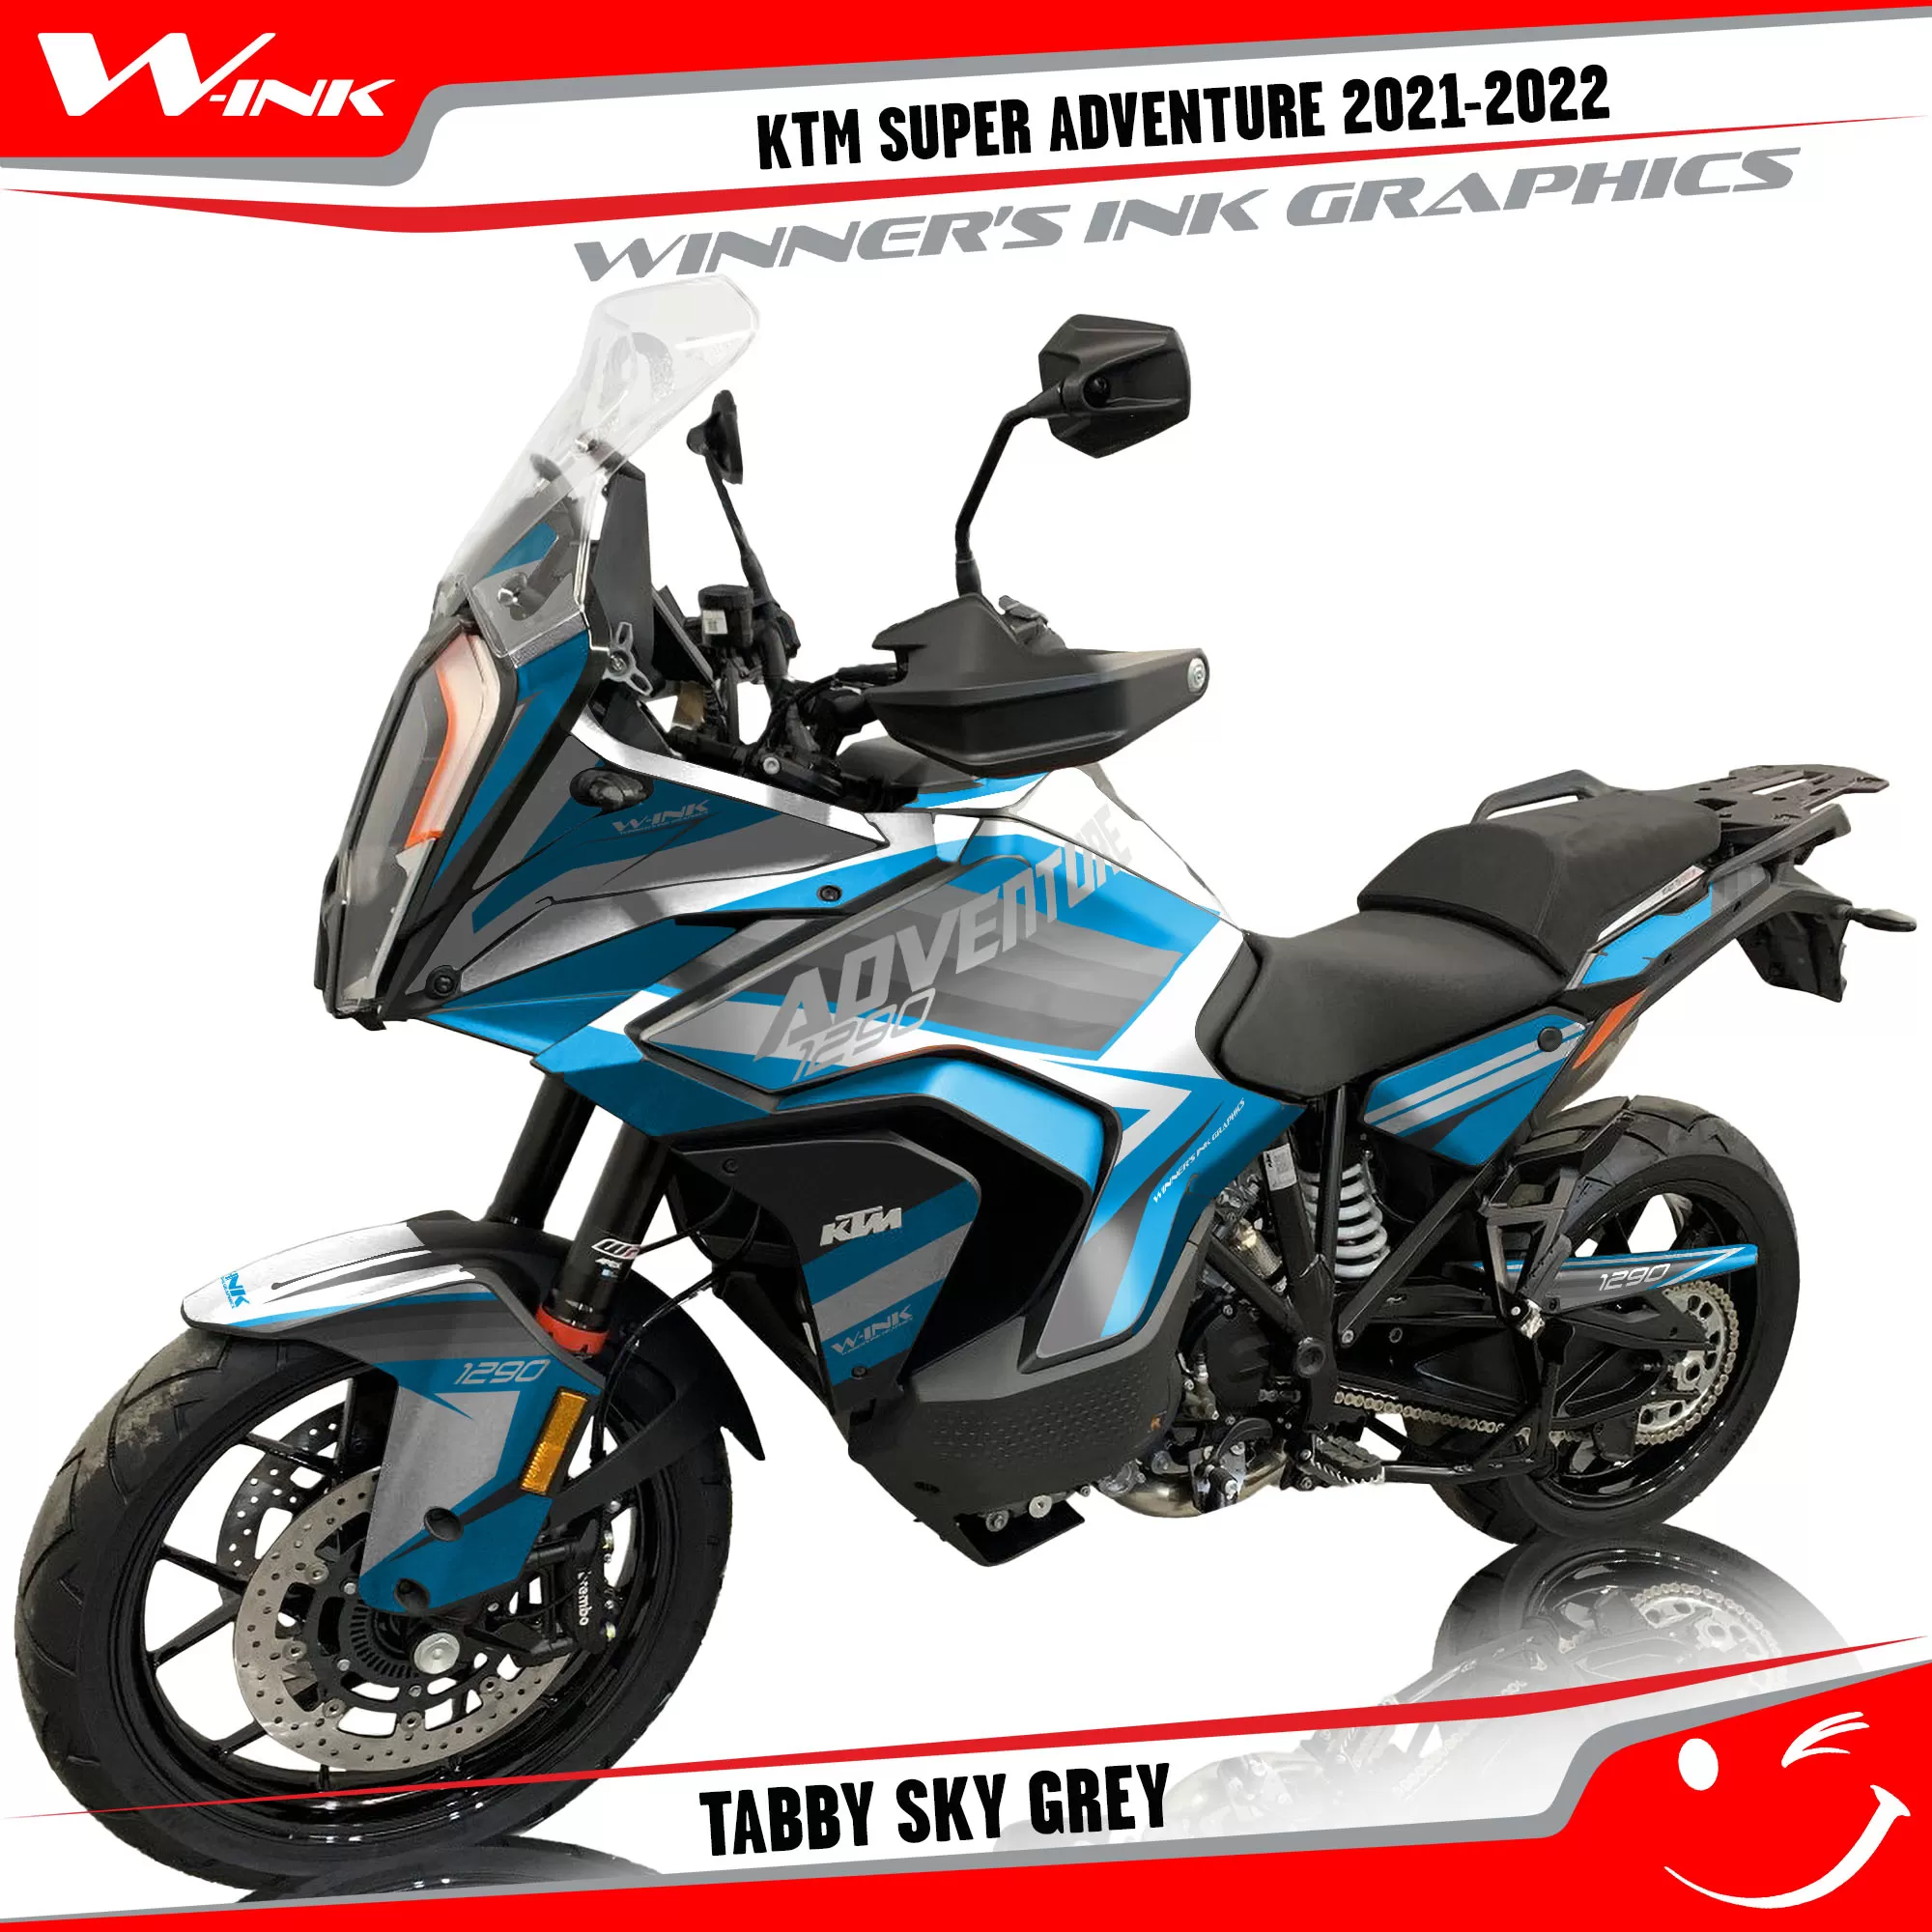 KTM-Super-Adventure-S-2021-2022-graphics-kit-and-decals-with-designs-Tabby-Sky-Grey